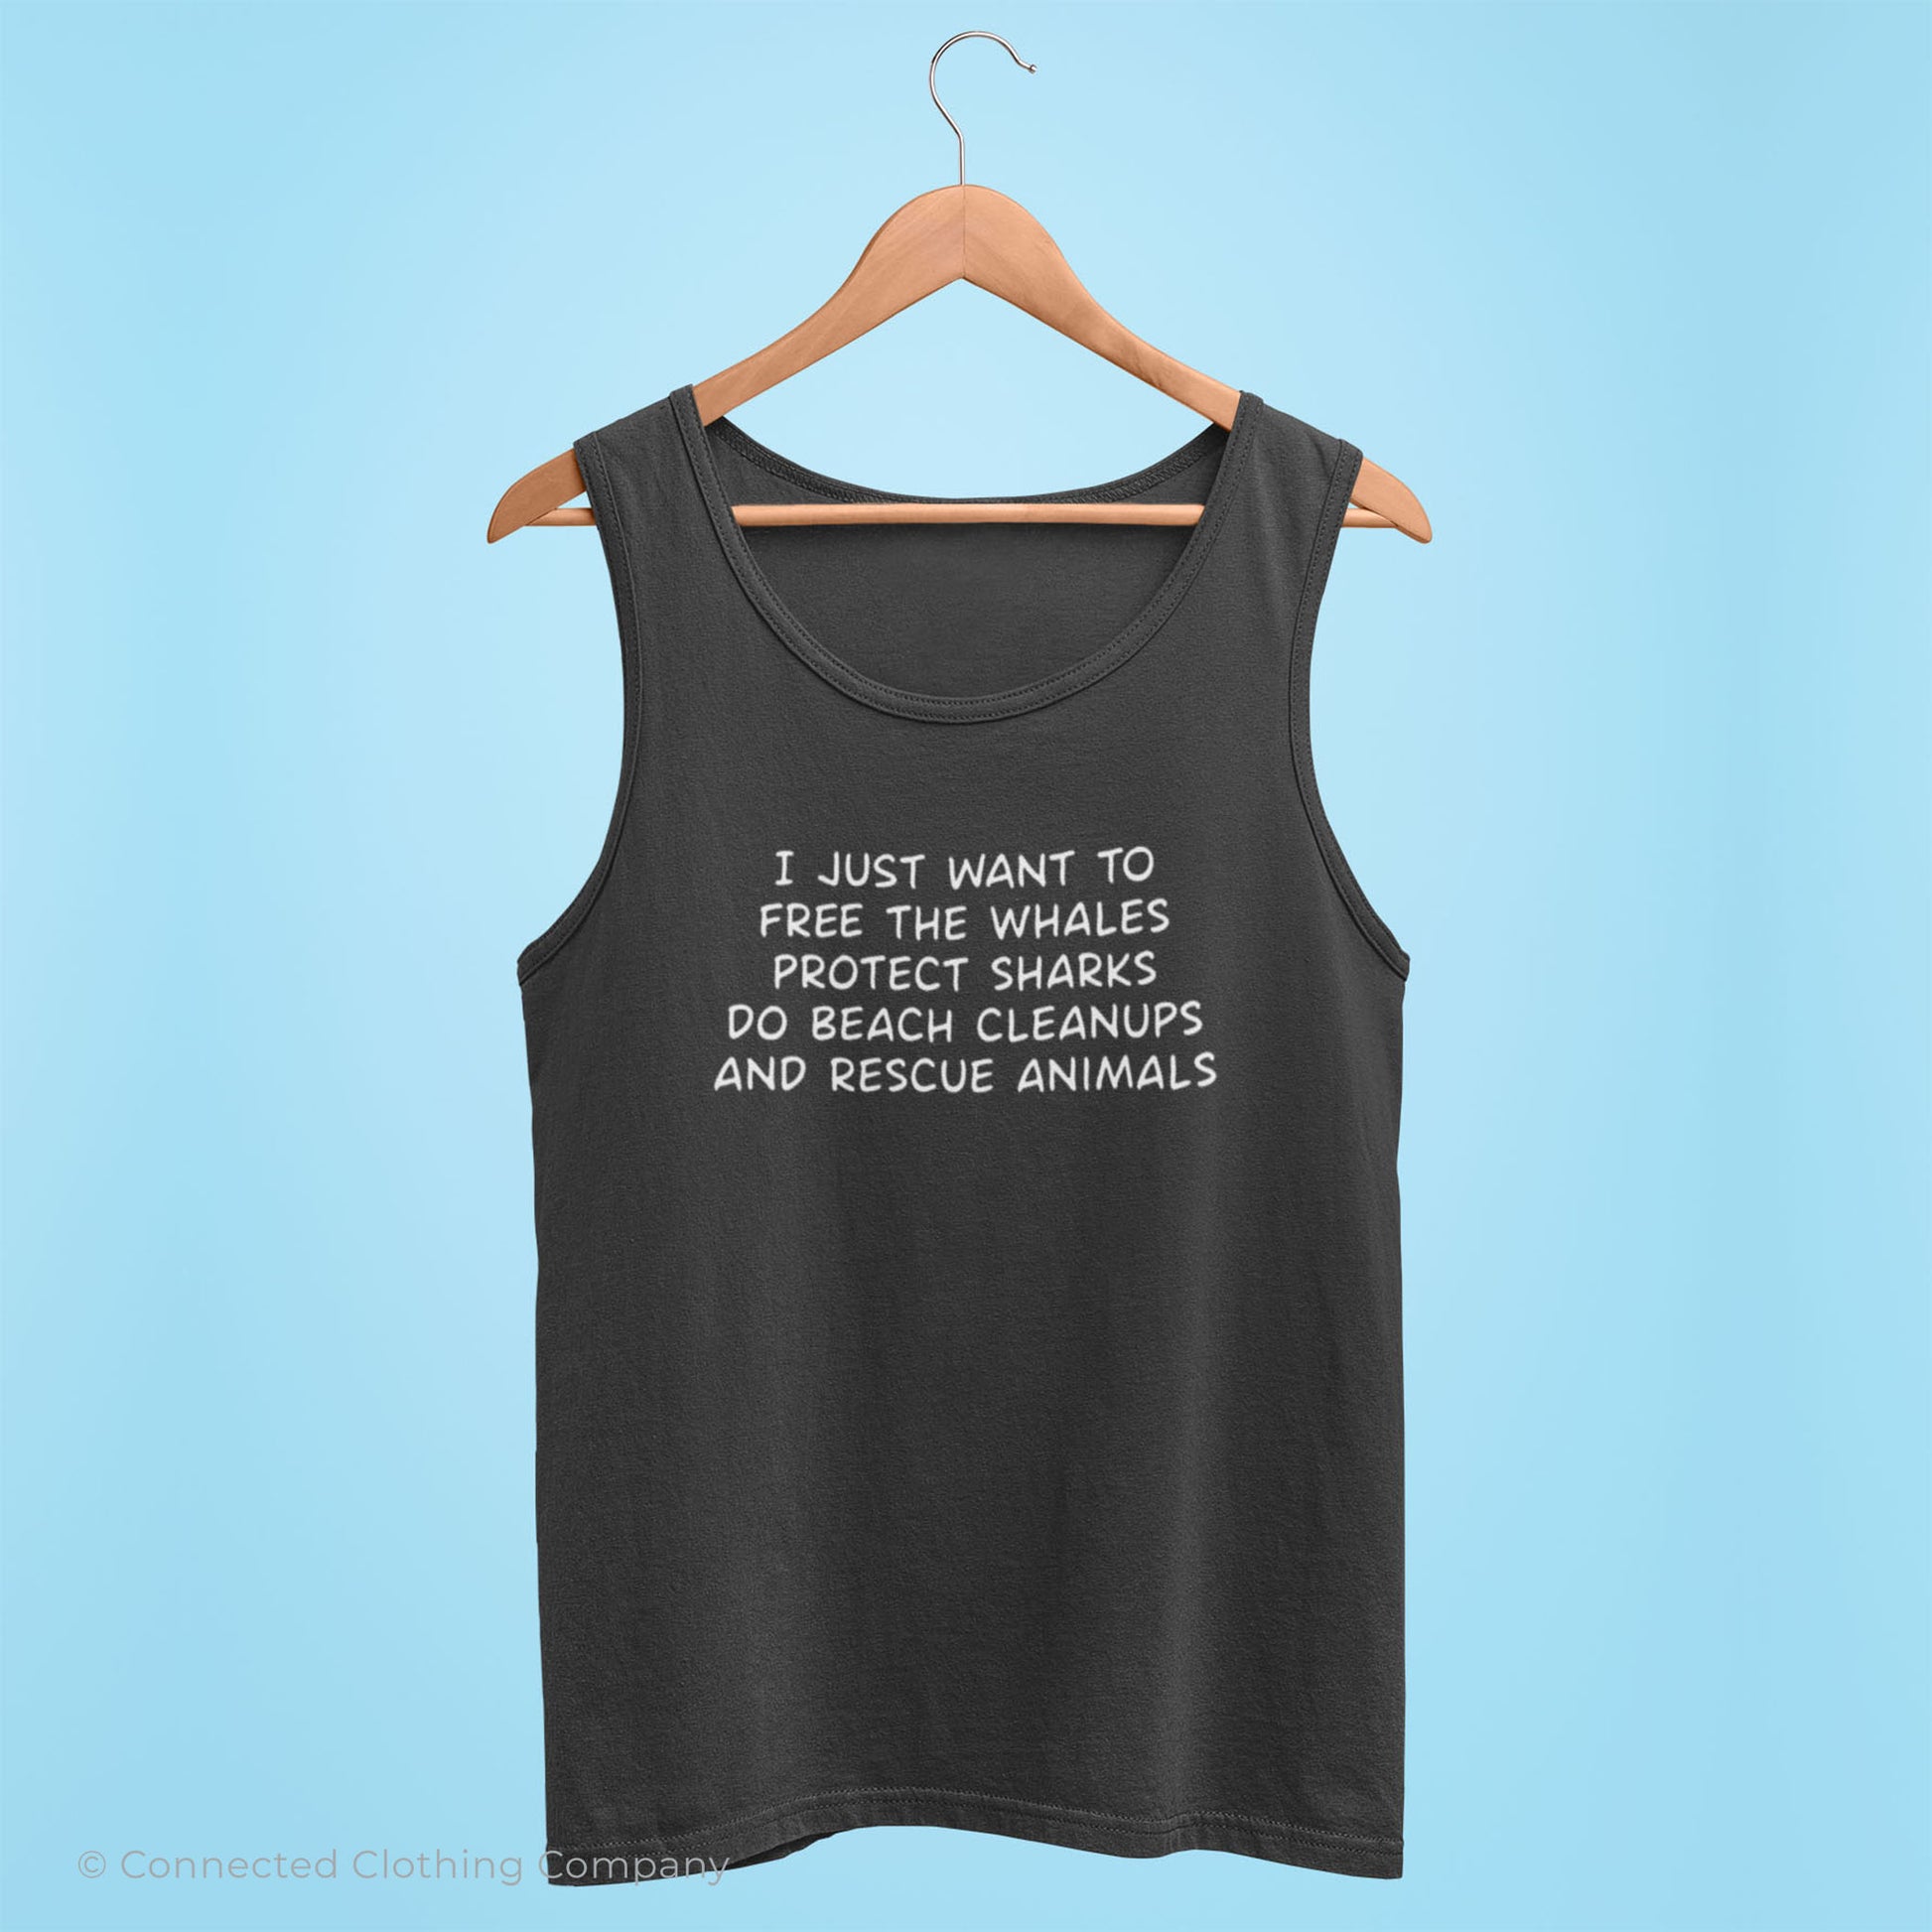 Asphalt I Just Want To Save The World Tank Top reads "I just want to free the whales, protect sharks, do beach cleanups, and rescue animals." - sweetsherriloudesigns - Ethically and Sustainably Made - 10% donated to Mission Blue ocean conservation